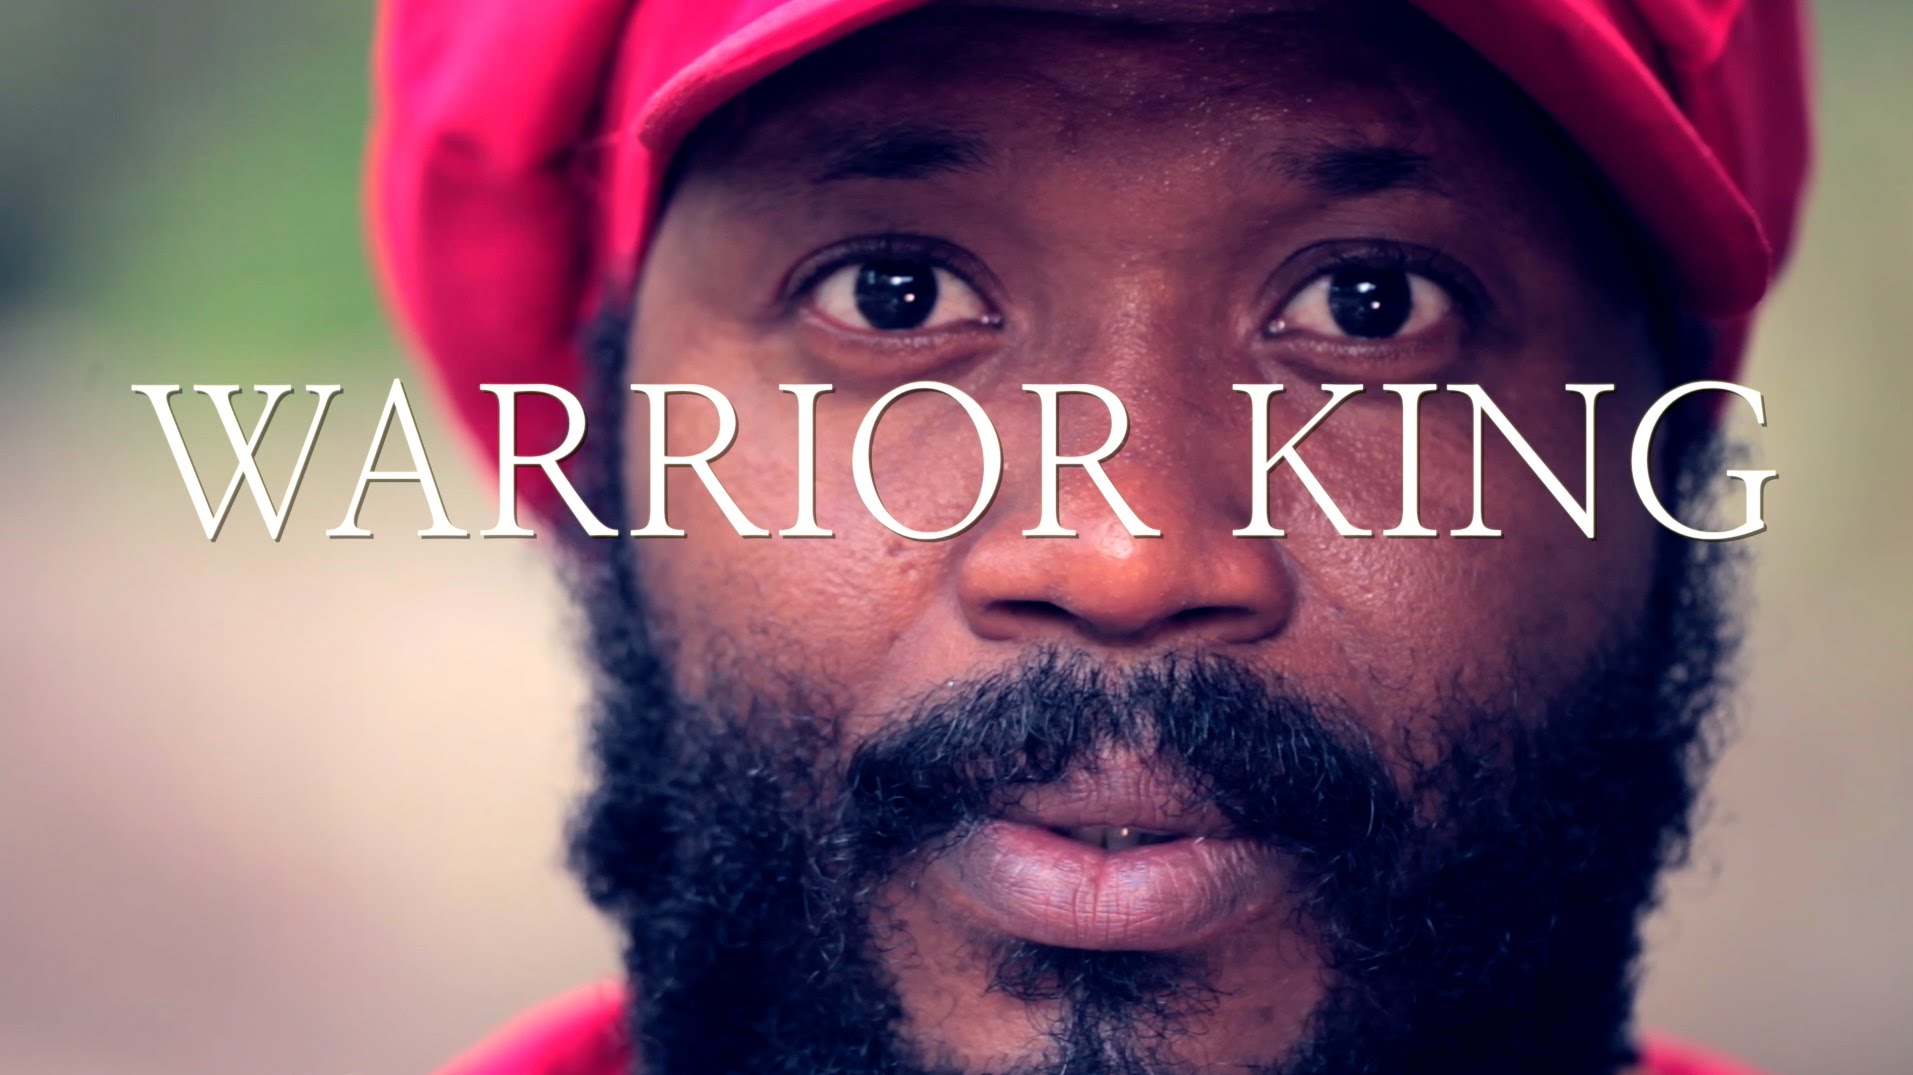 Warrior King - Ain't Giving Up [3/11/2015]